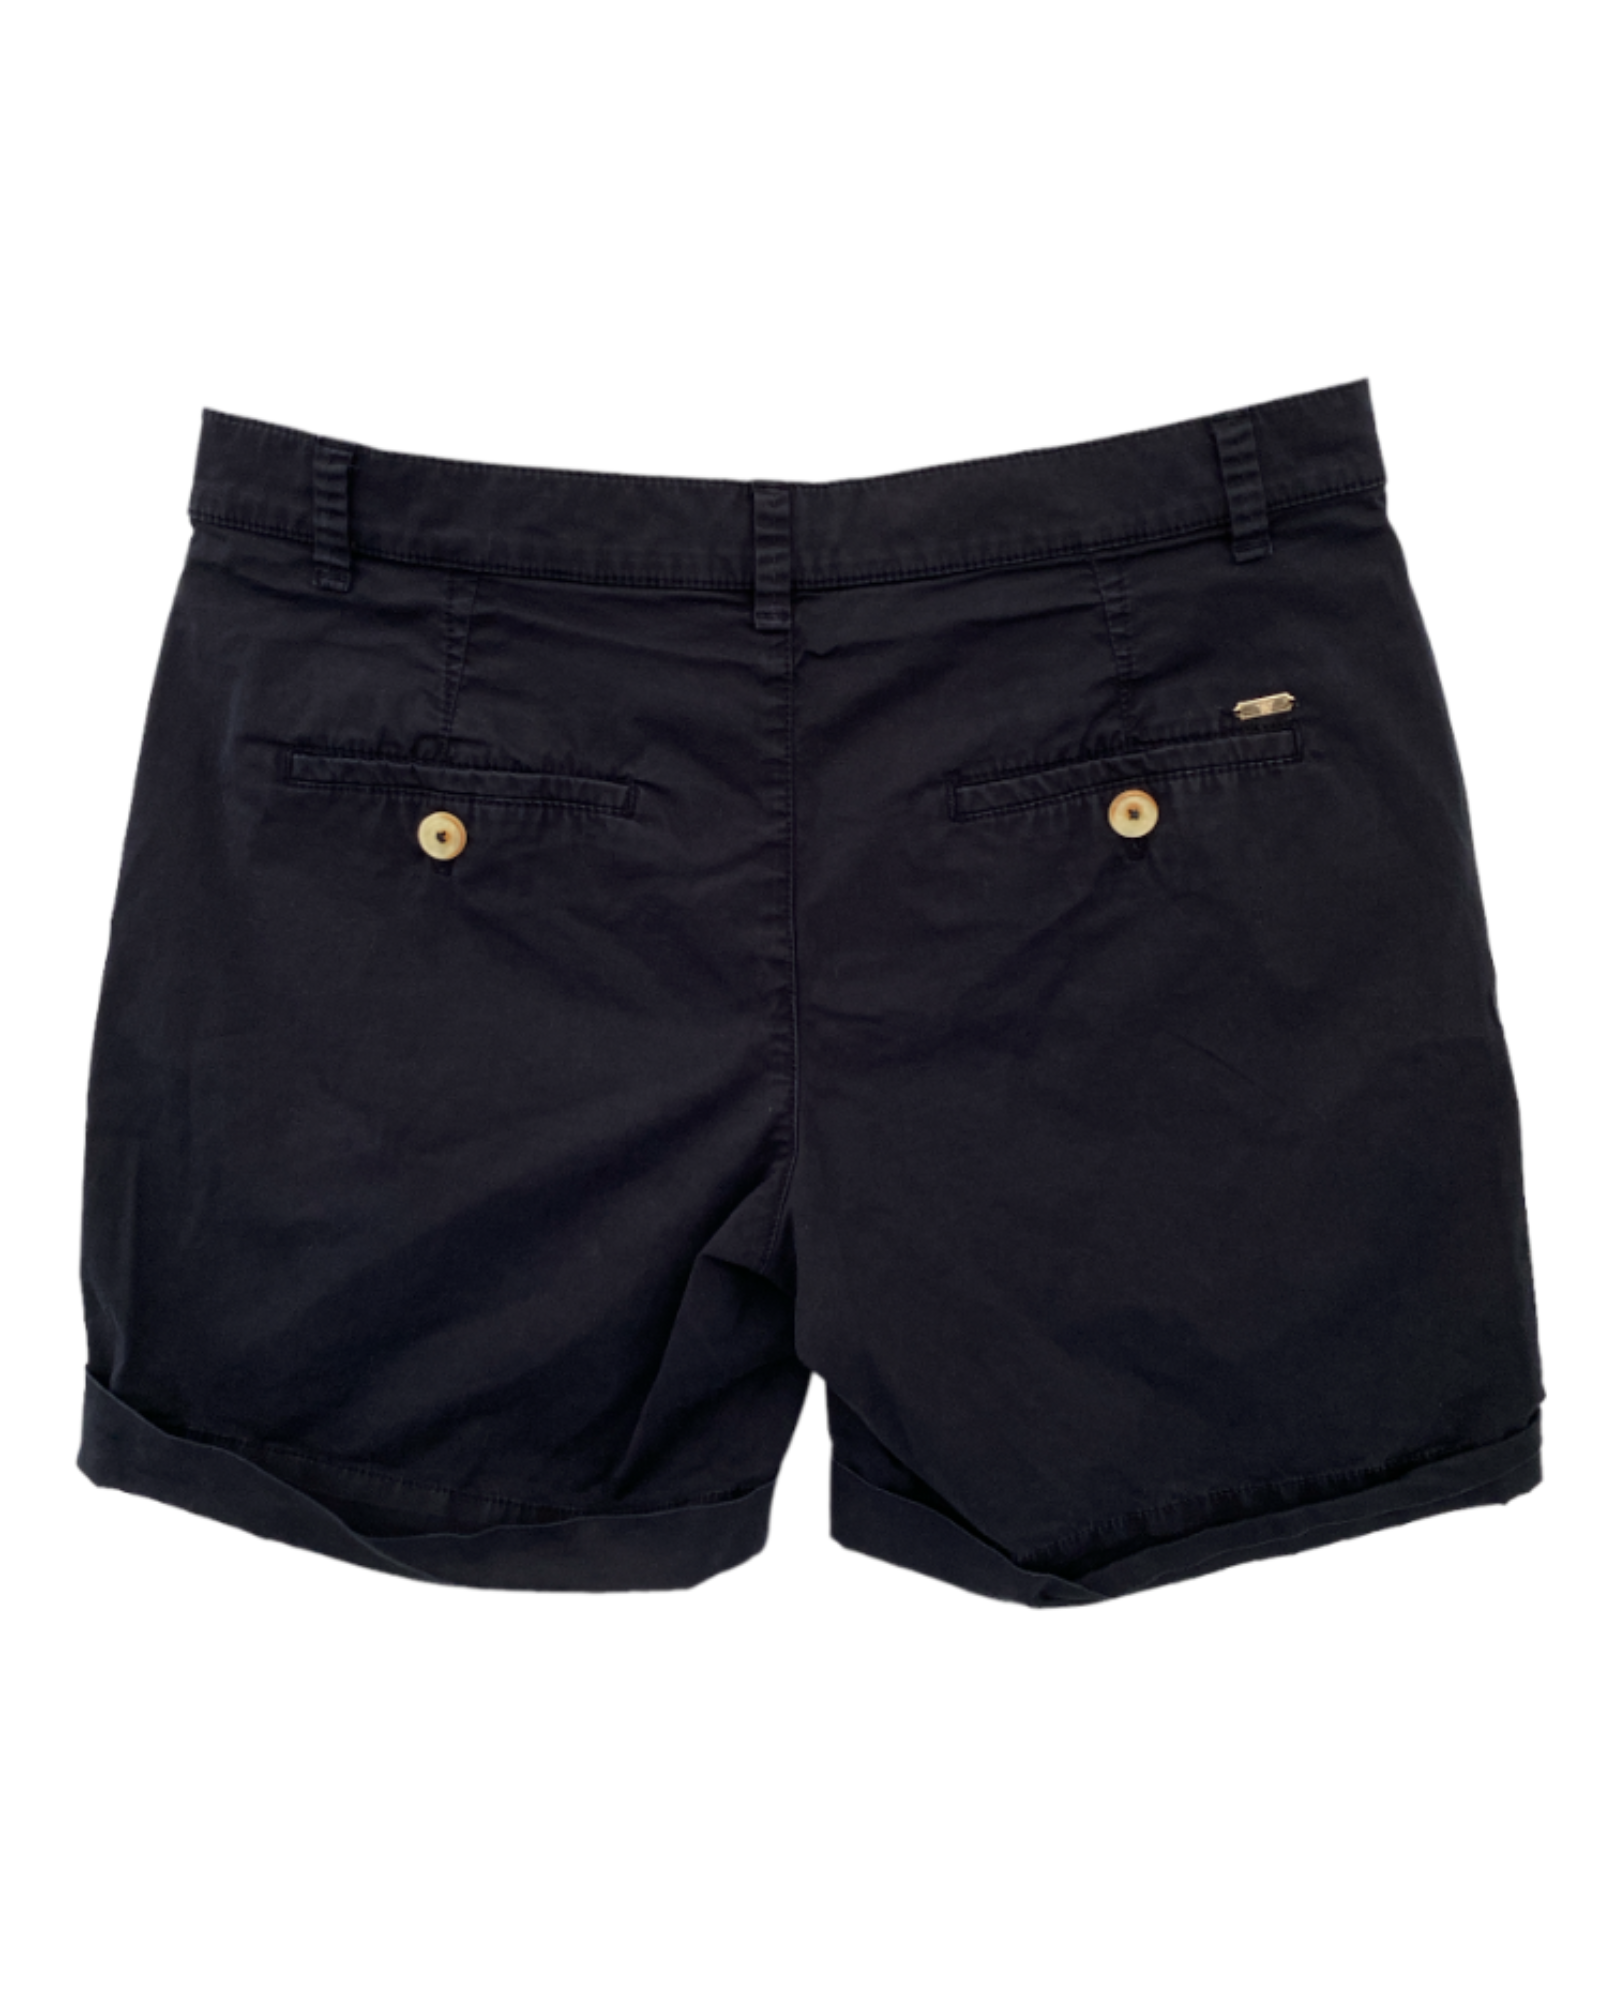 Shorts Casuales Mossimo